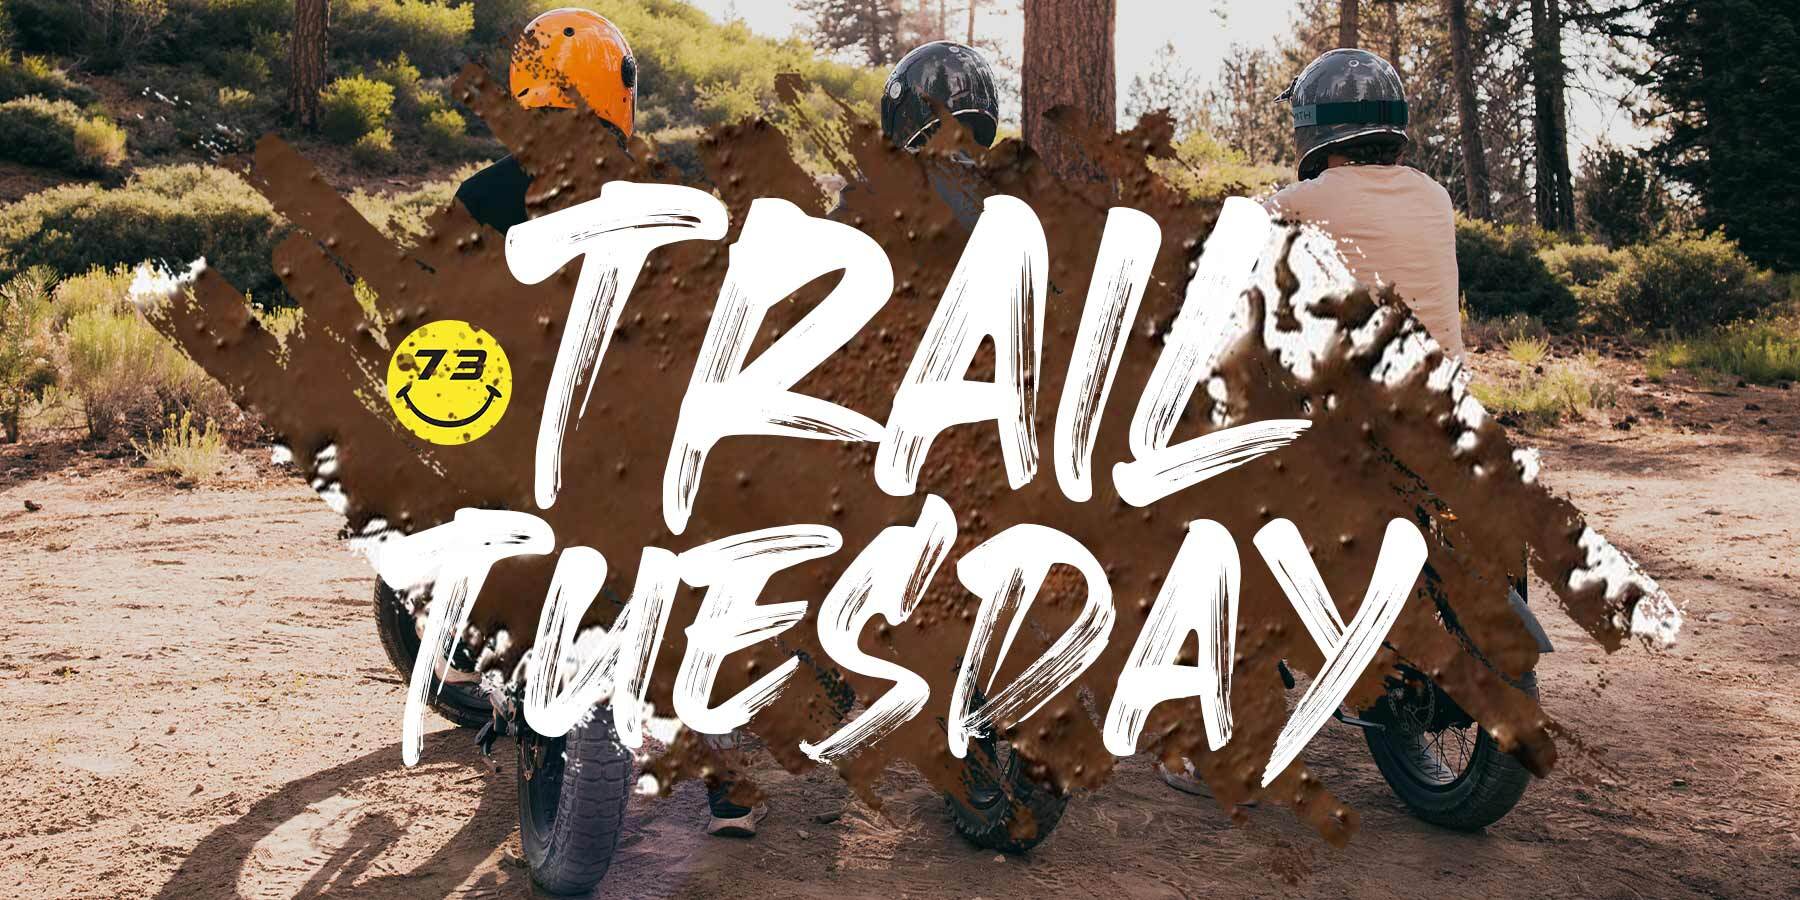 Graphic of Super73 riders with mud splattered on top and the words TRAIL TUESDAY